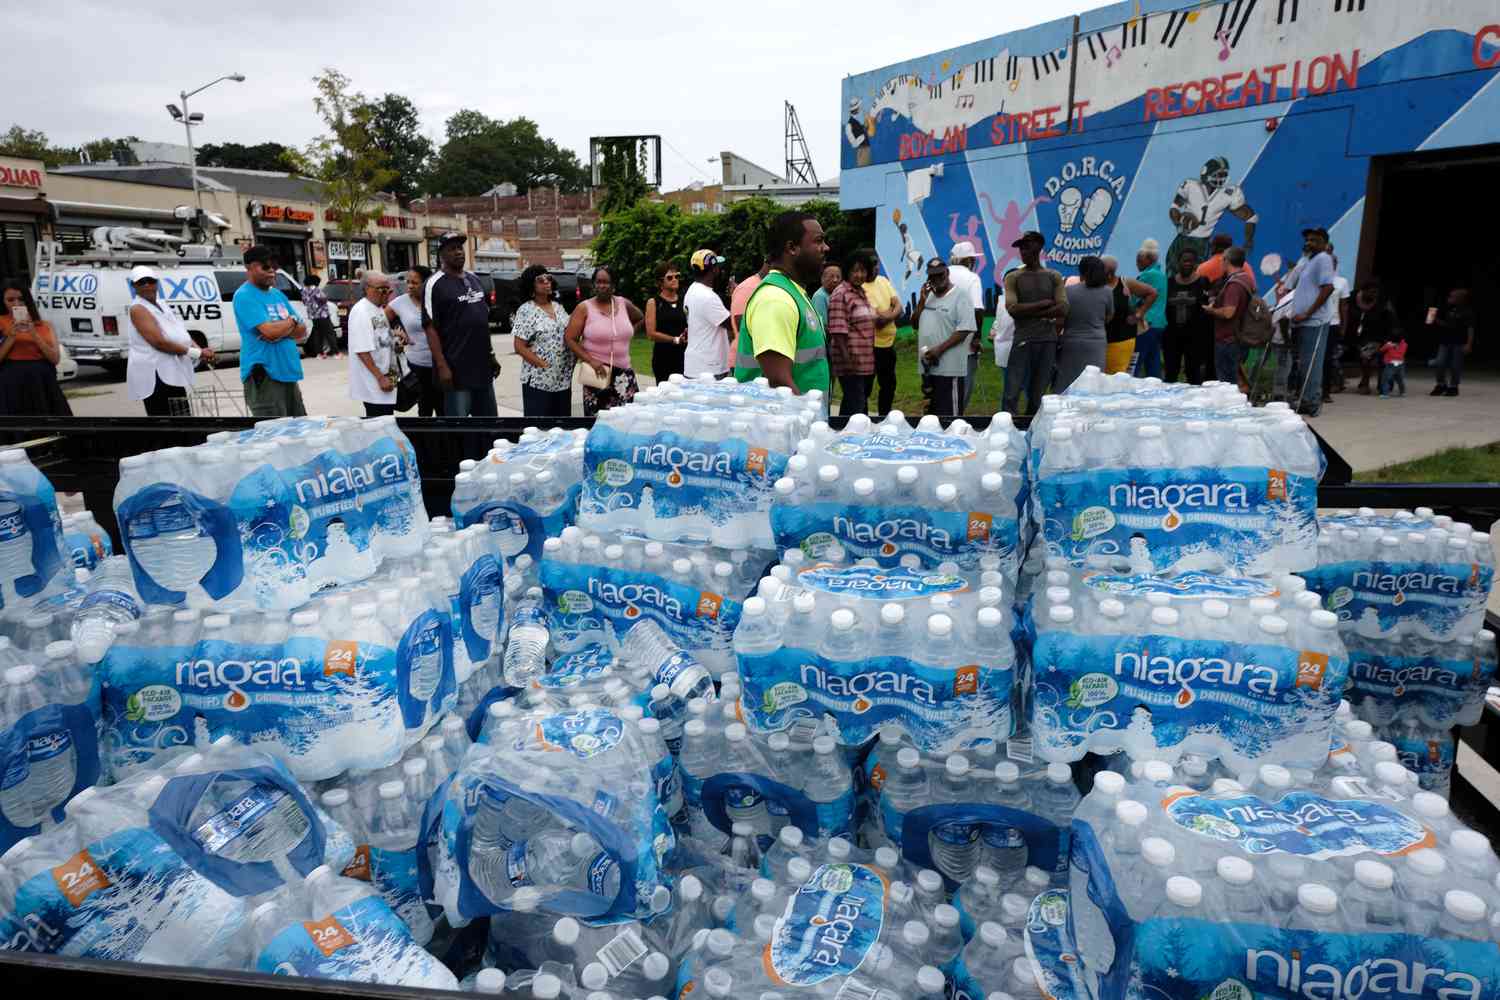 A pallet of bottled water is delivered to a recreation center on August 13, 2019 in Newark, New Jersey. Residents of Newark, the largest city in New Jersey, are to receive free water after lead was found in the tap water. It was reported over the weekend that lead levels in some areas of the city were still not safe and the city has begun distributing bottled water for cooking and drinking.